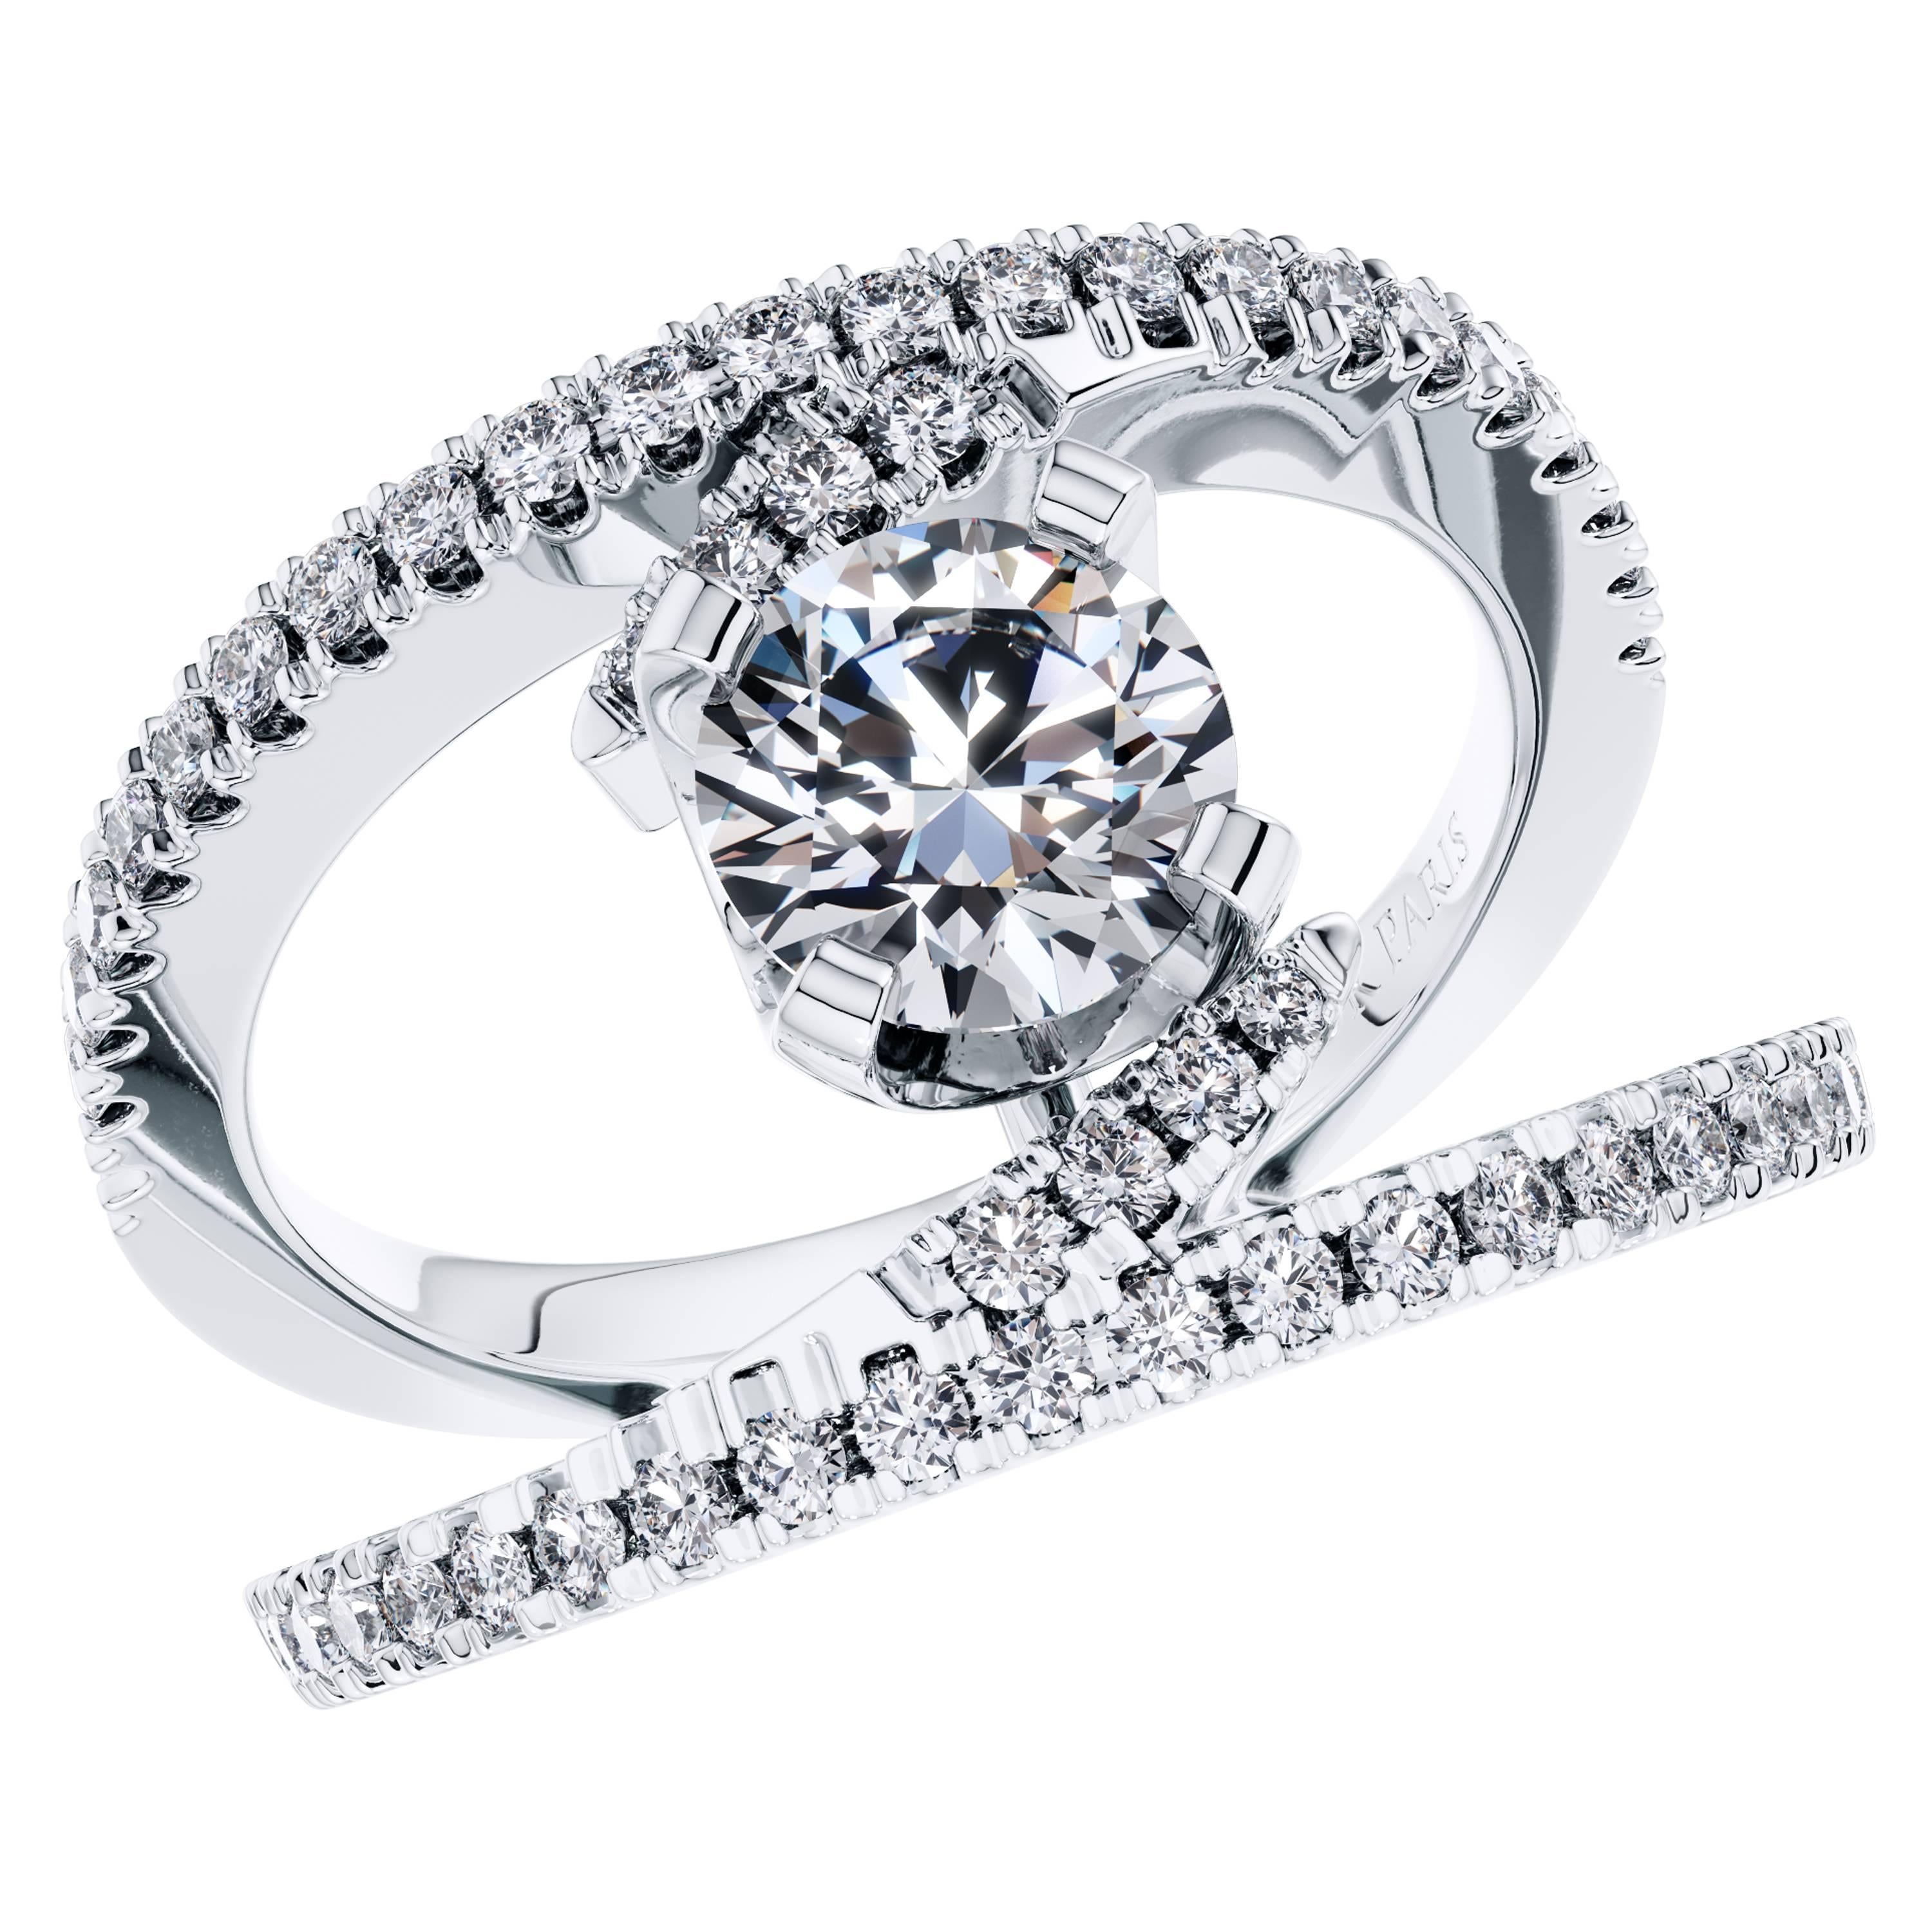 This Stunning 2.00 Carat Round Brilliant Cross Over Diamond Engagement Ring White Color H Clarity SI1 featuring 0.65 Carat of White Round Diamonds giving this Ring an exceptional look and timeless glamour in its 18 Karat White Gold Setting. UK size